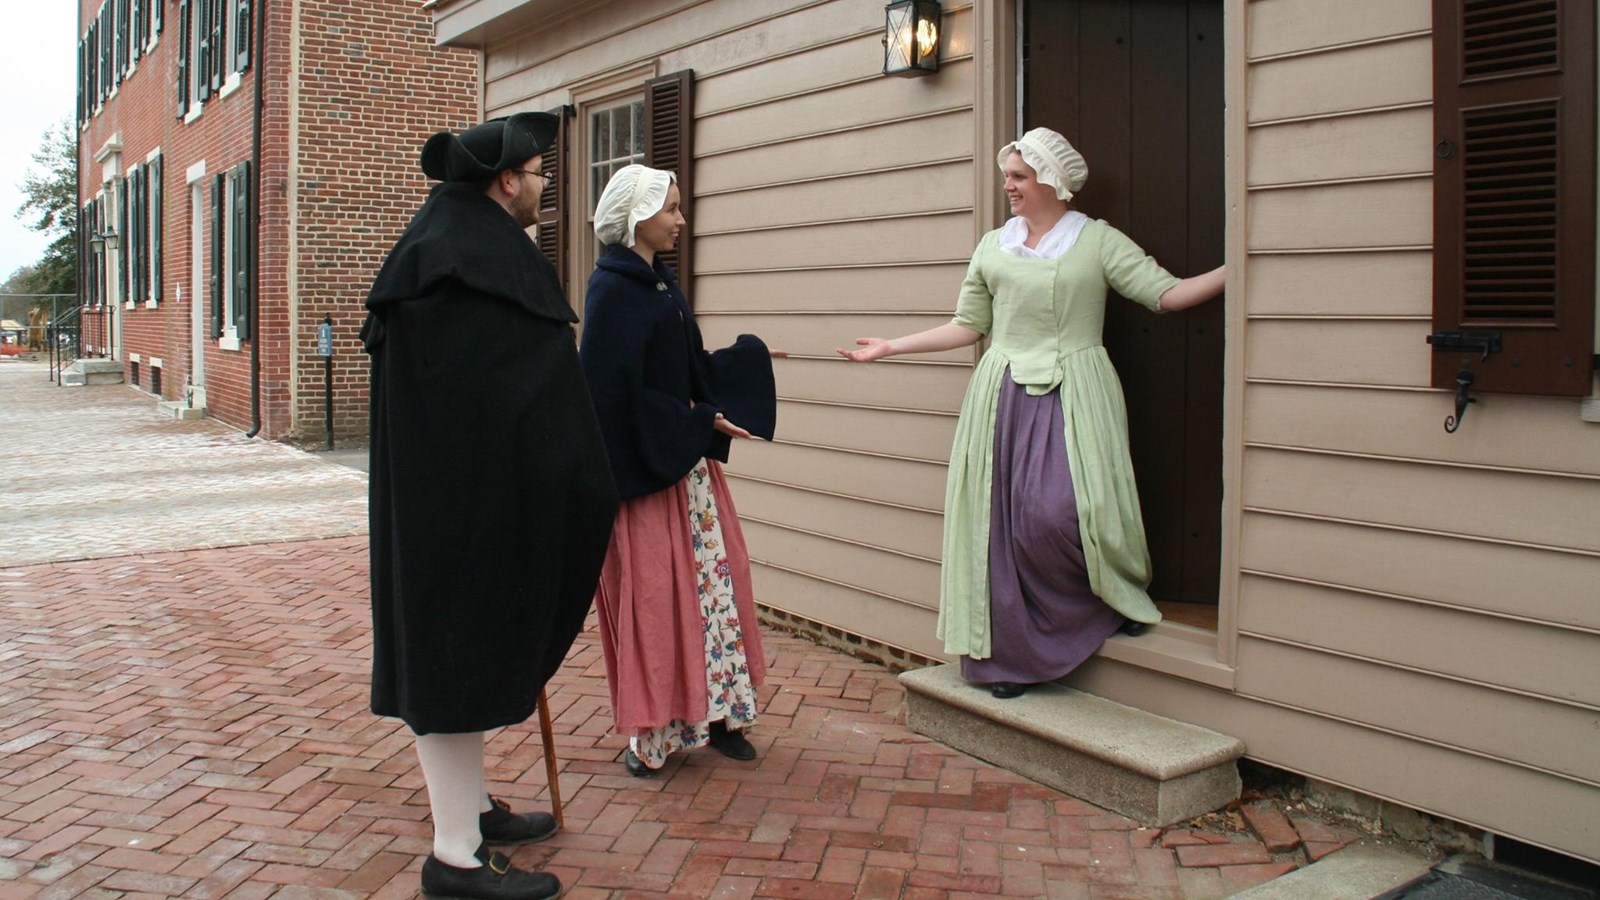 A women welcomes two people inside a small cottage. 